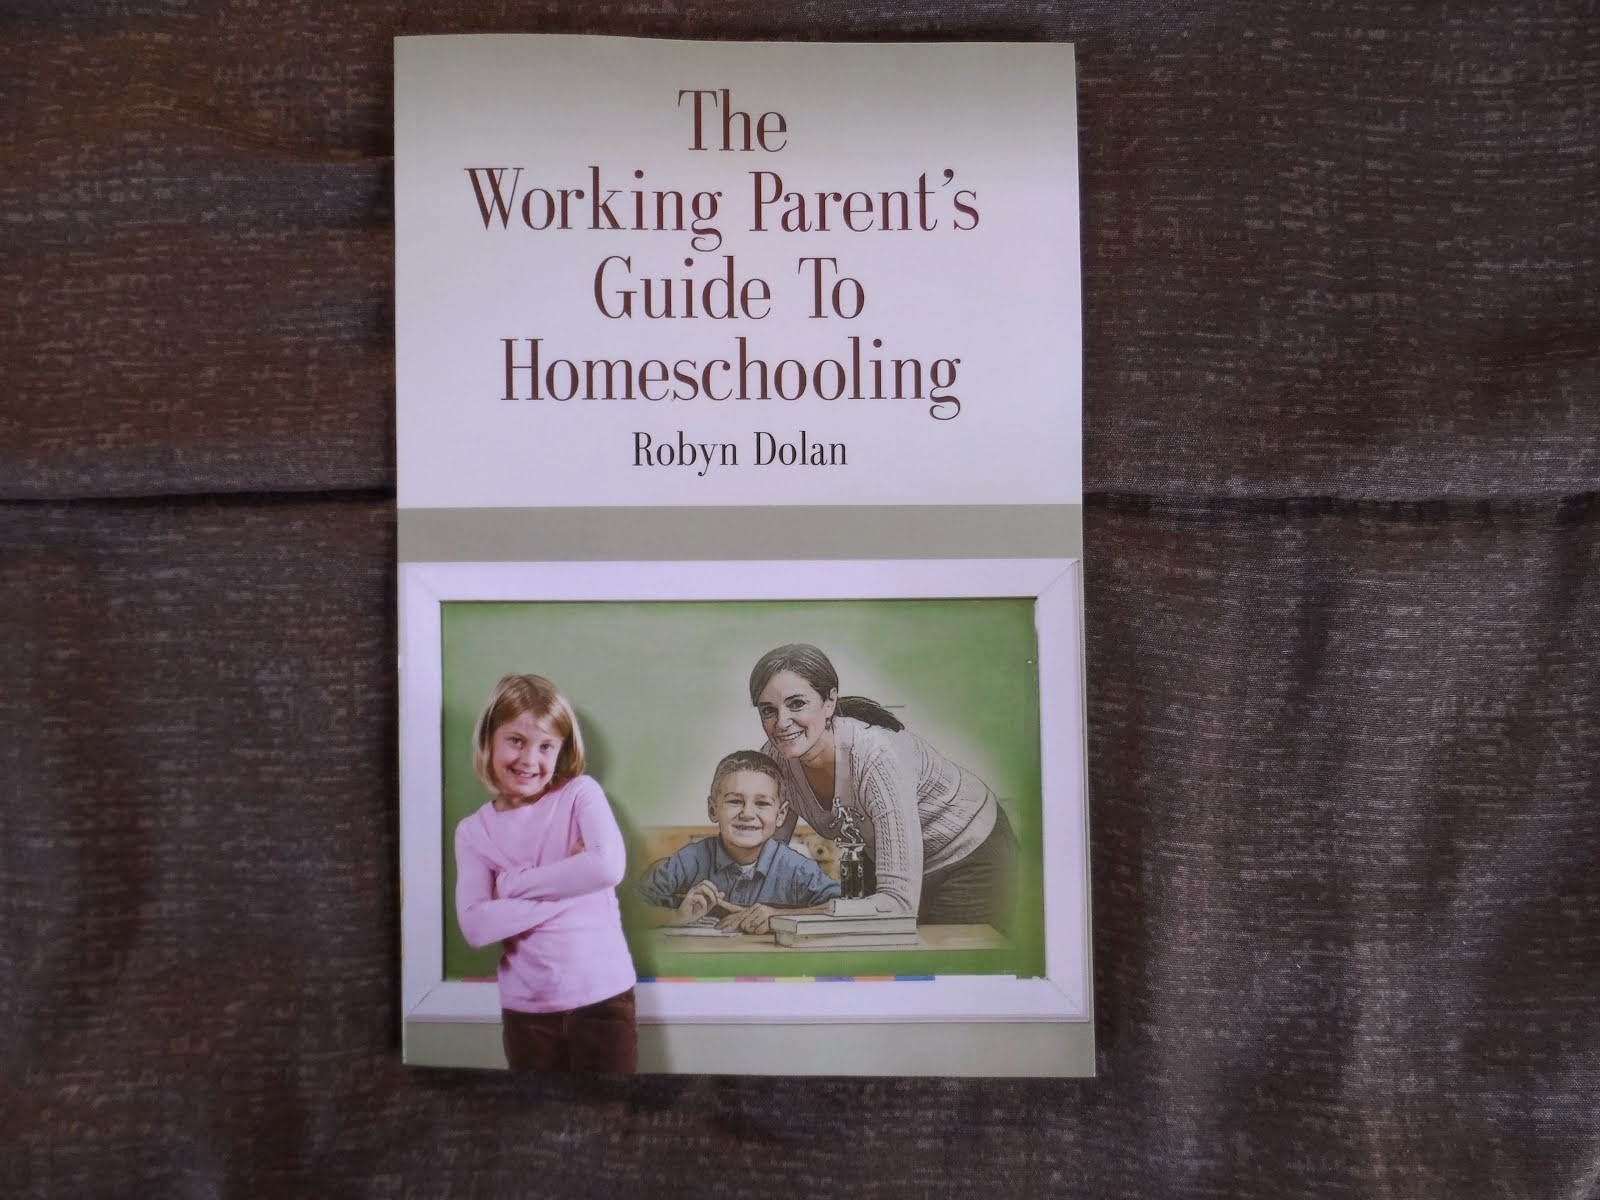 The Working Parent's Guide To Homeschooling